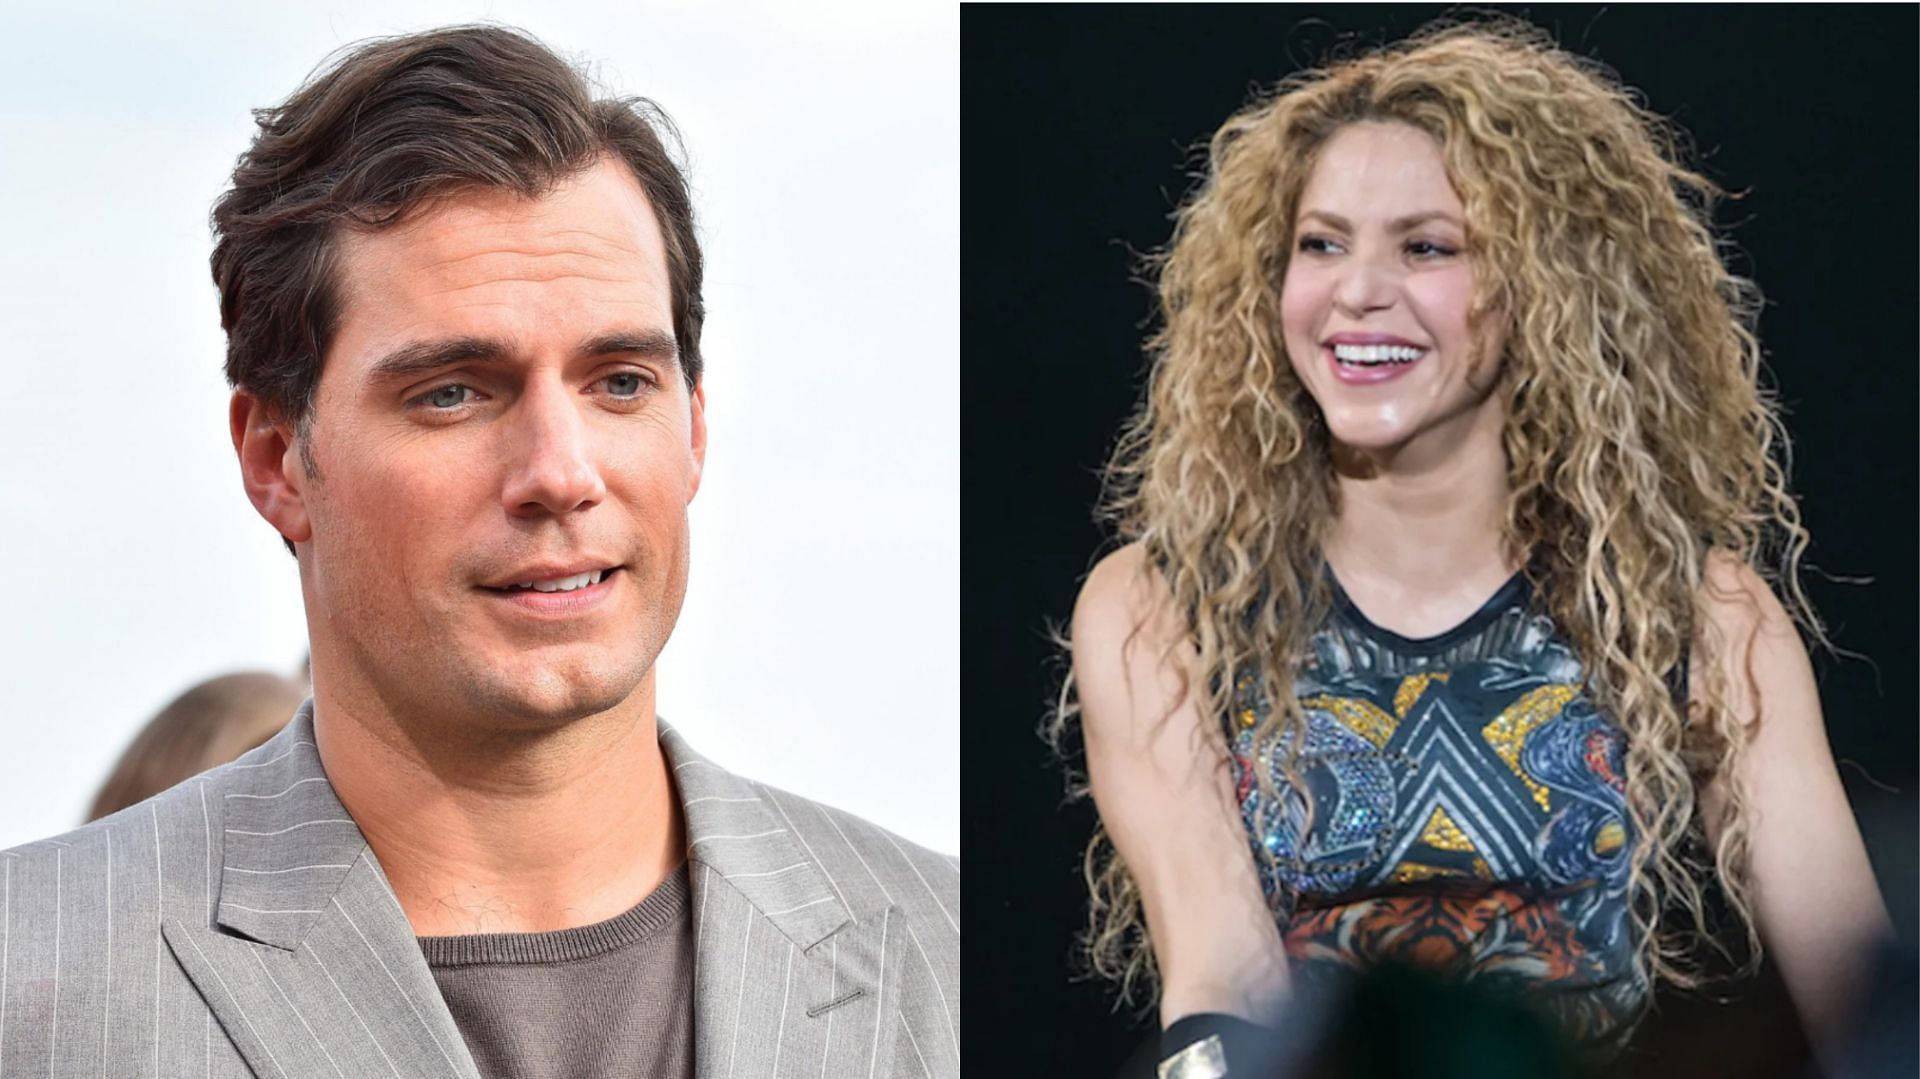 Henry Cavill was distracted by Shakira on the red carpet, as per a resurfaced video from 2015 (Image via Getty Images/Kristy Sparow/Brian Rasic)